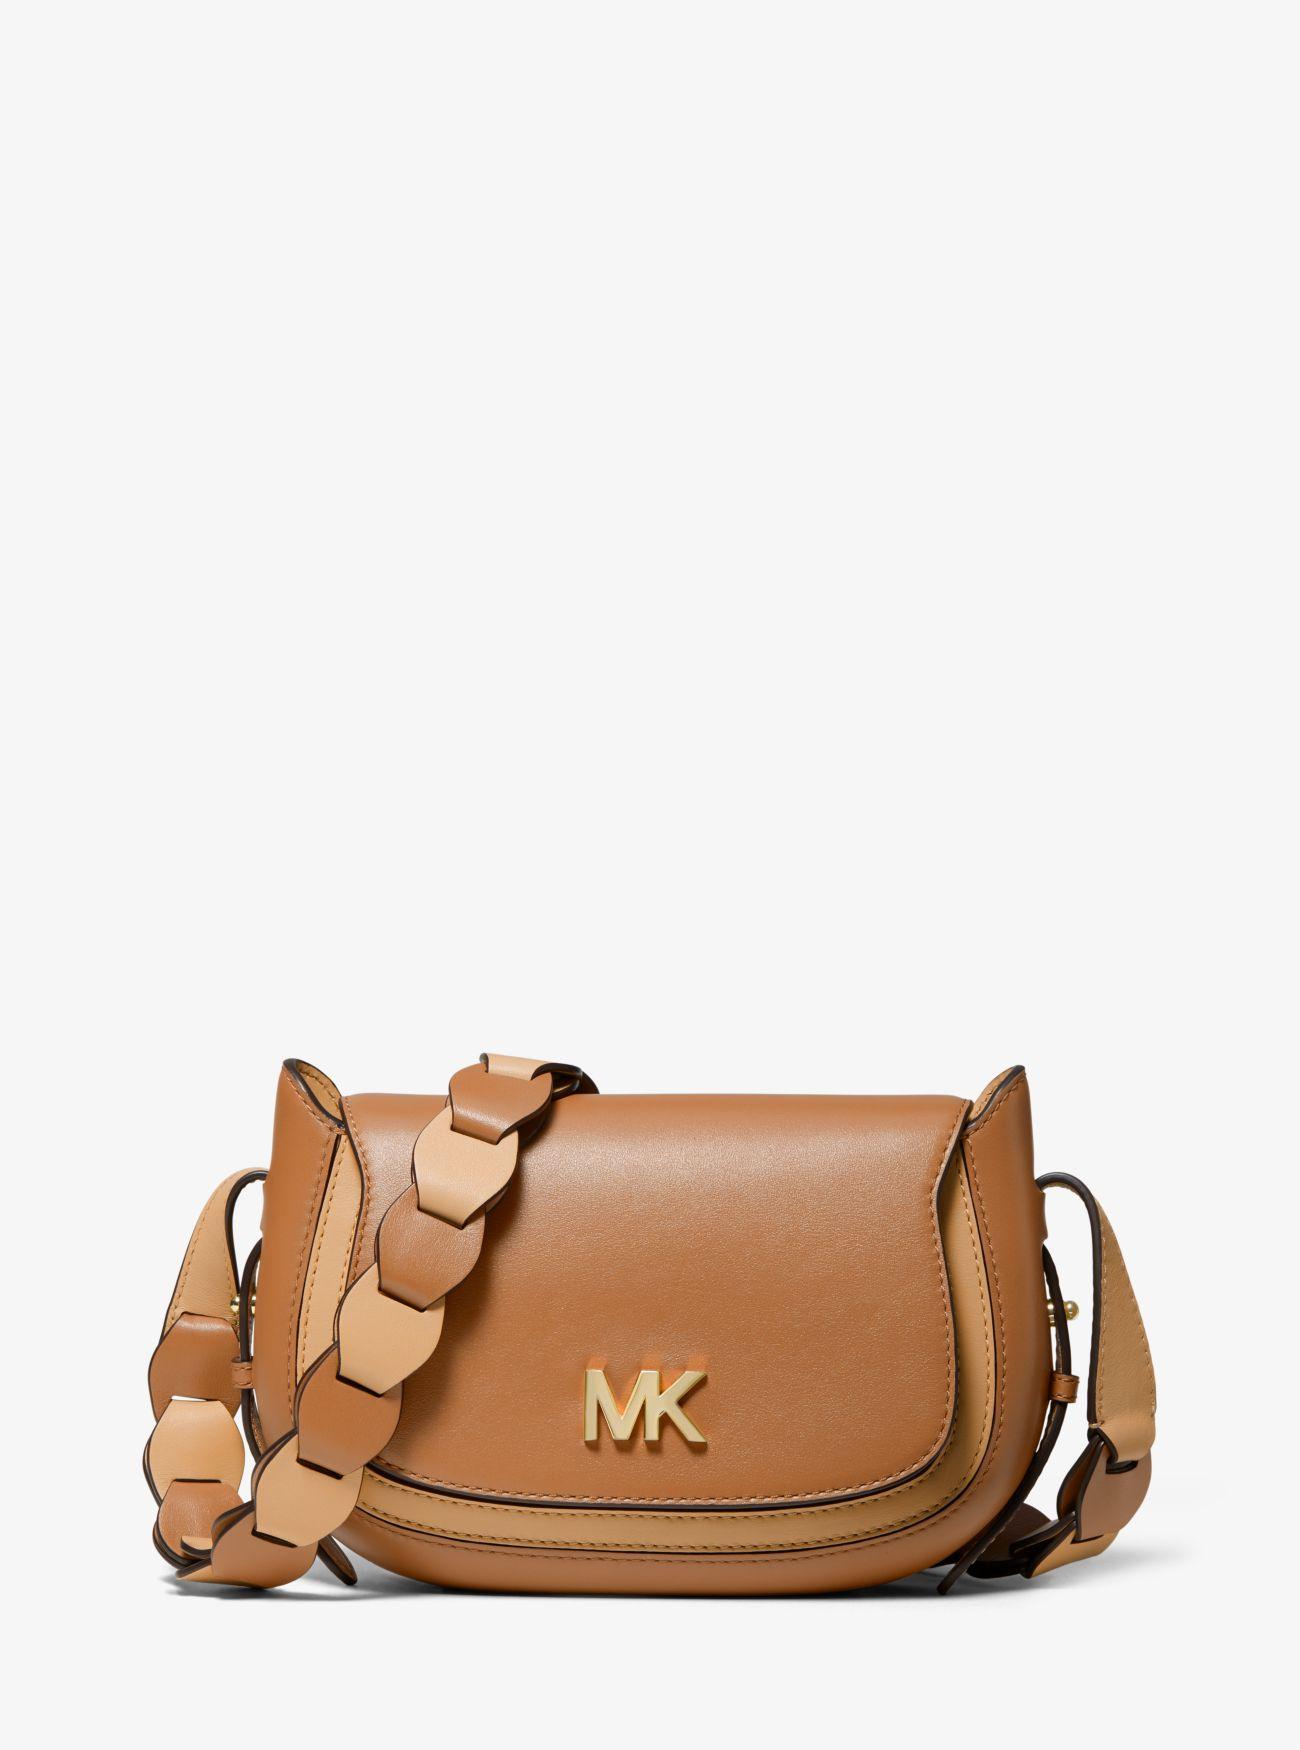 Michael Kors Jolene Small Two-tone Leather Saddle Bag in Brown - Lyst